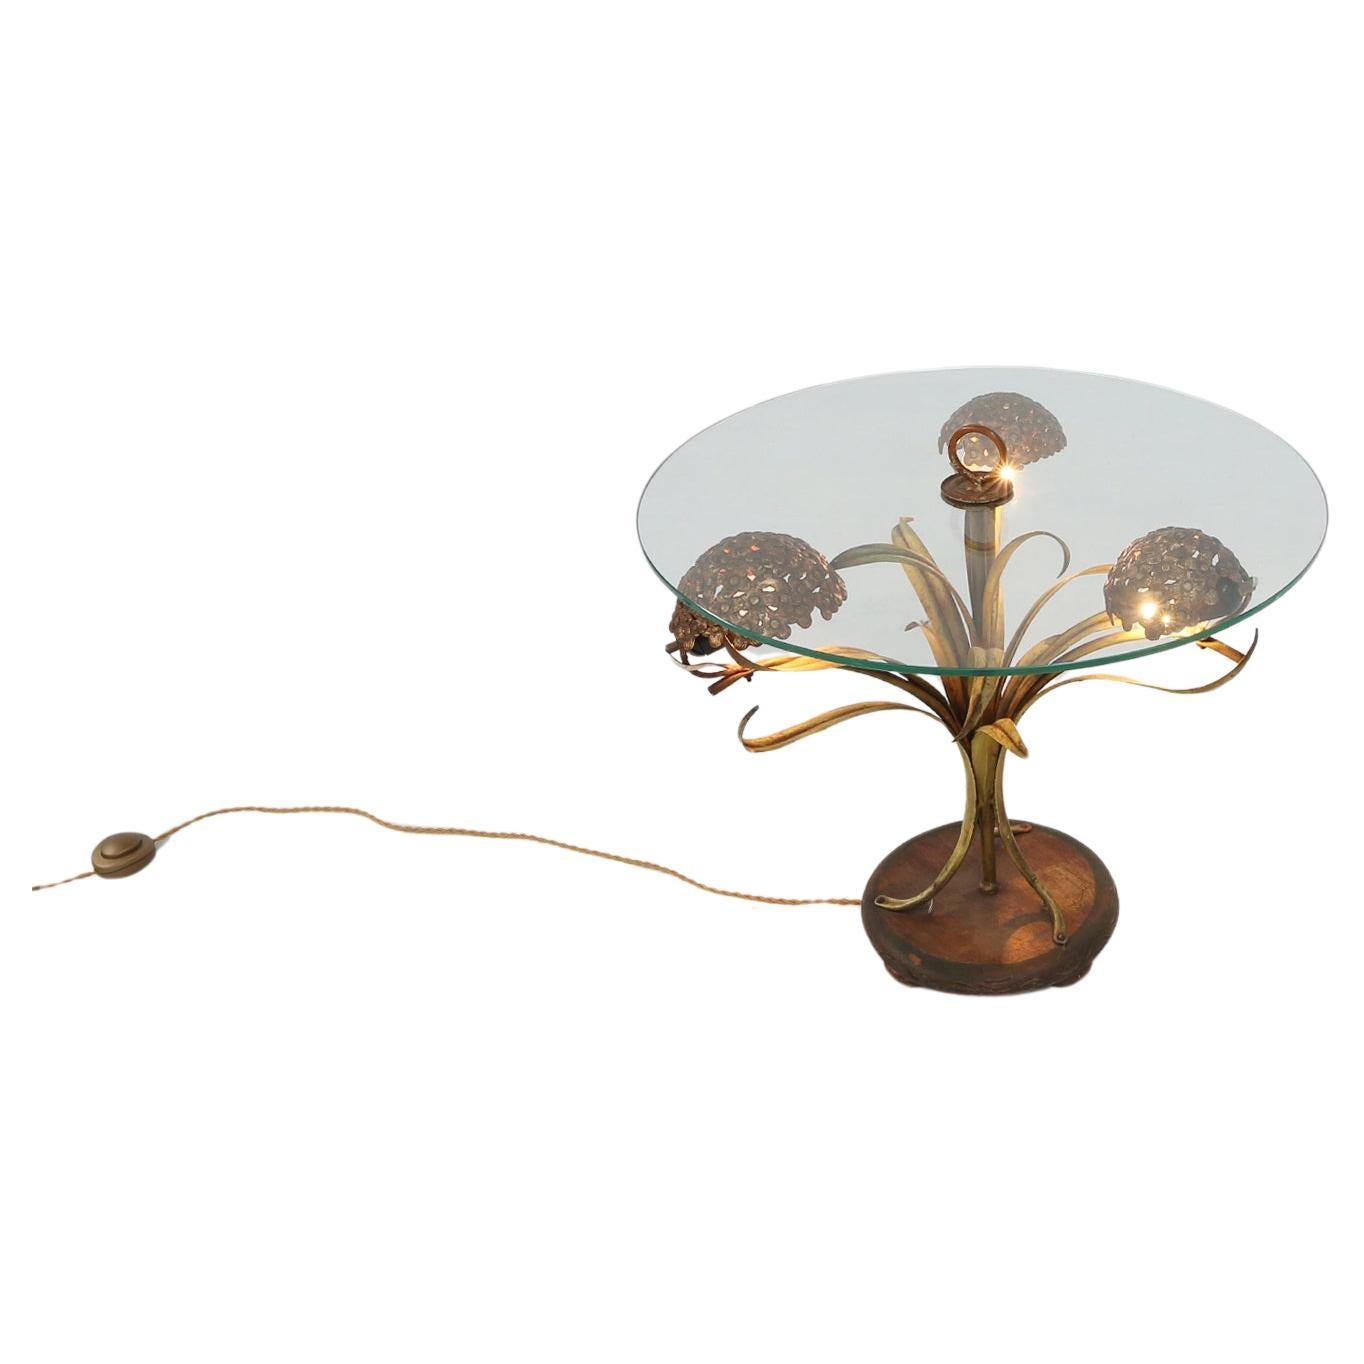 France / 1950 / coffee table / metal and glass / mid-century / vintage / design

A unique and stylish coffee table with lighting in brass flowers and leafs, made in France ca. 1950. The table has a round glass top with brass ring-shaped handle.